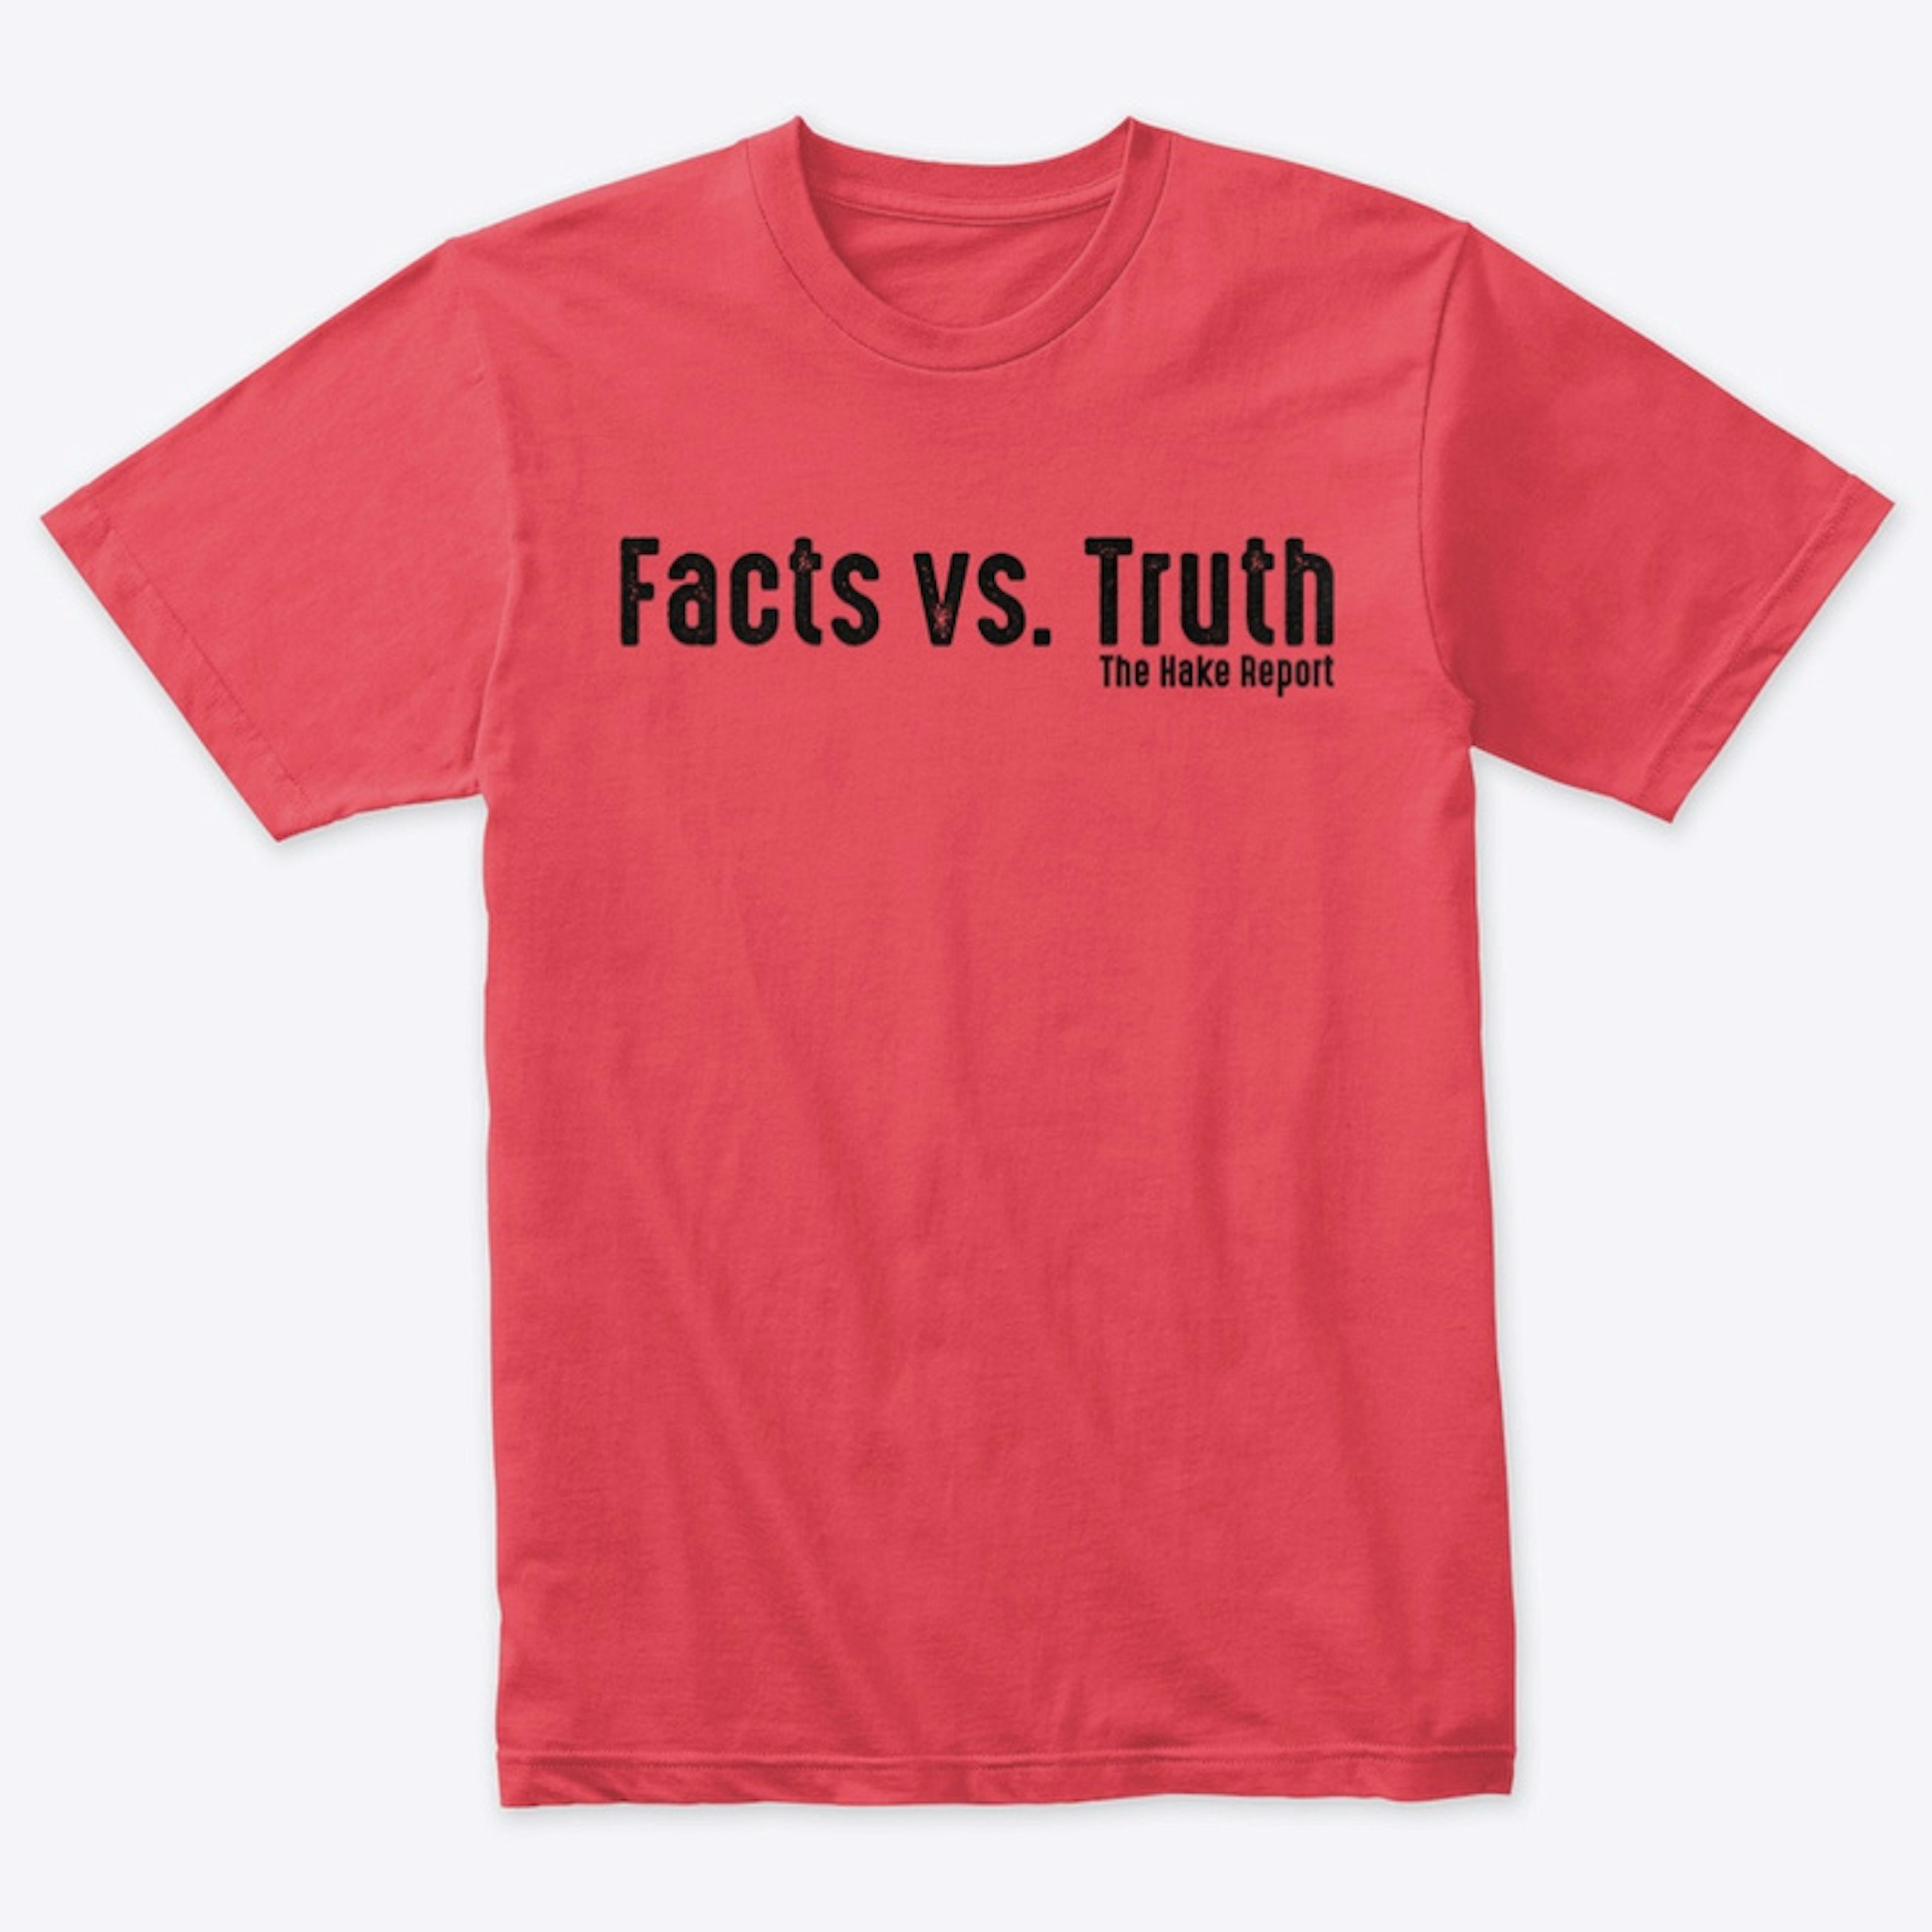 Facts vs. Truth (Black Ink)